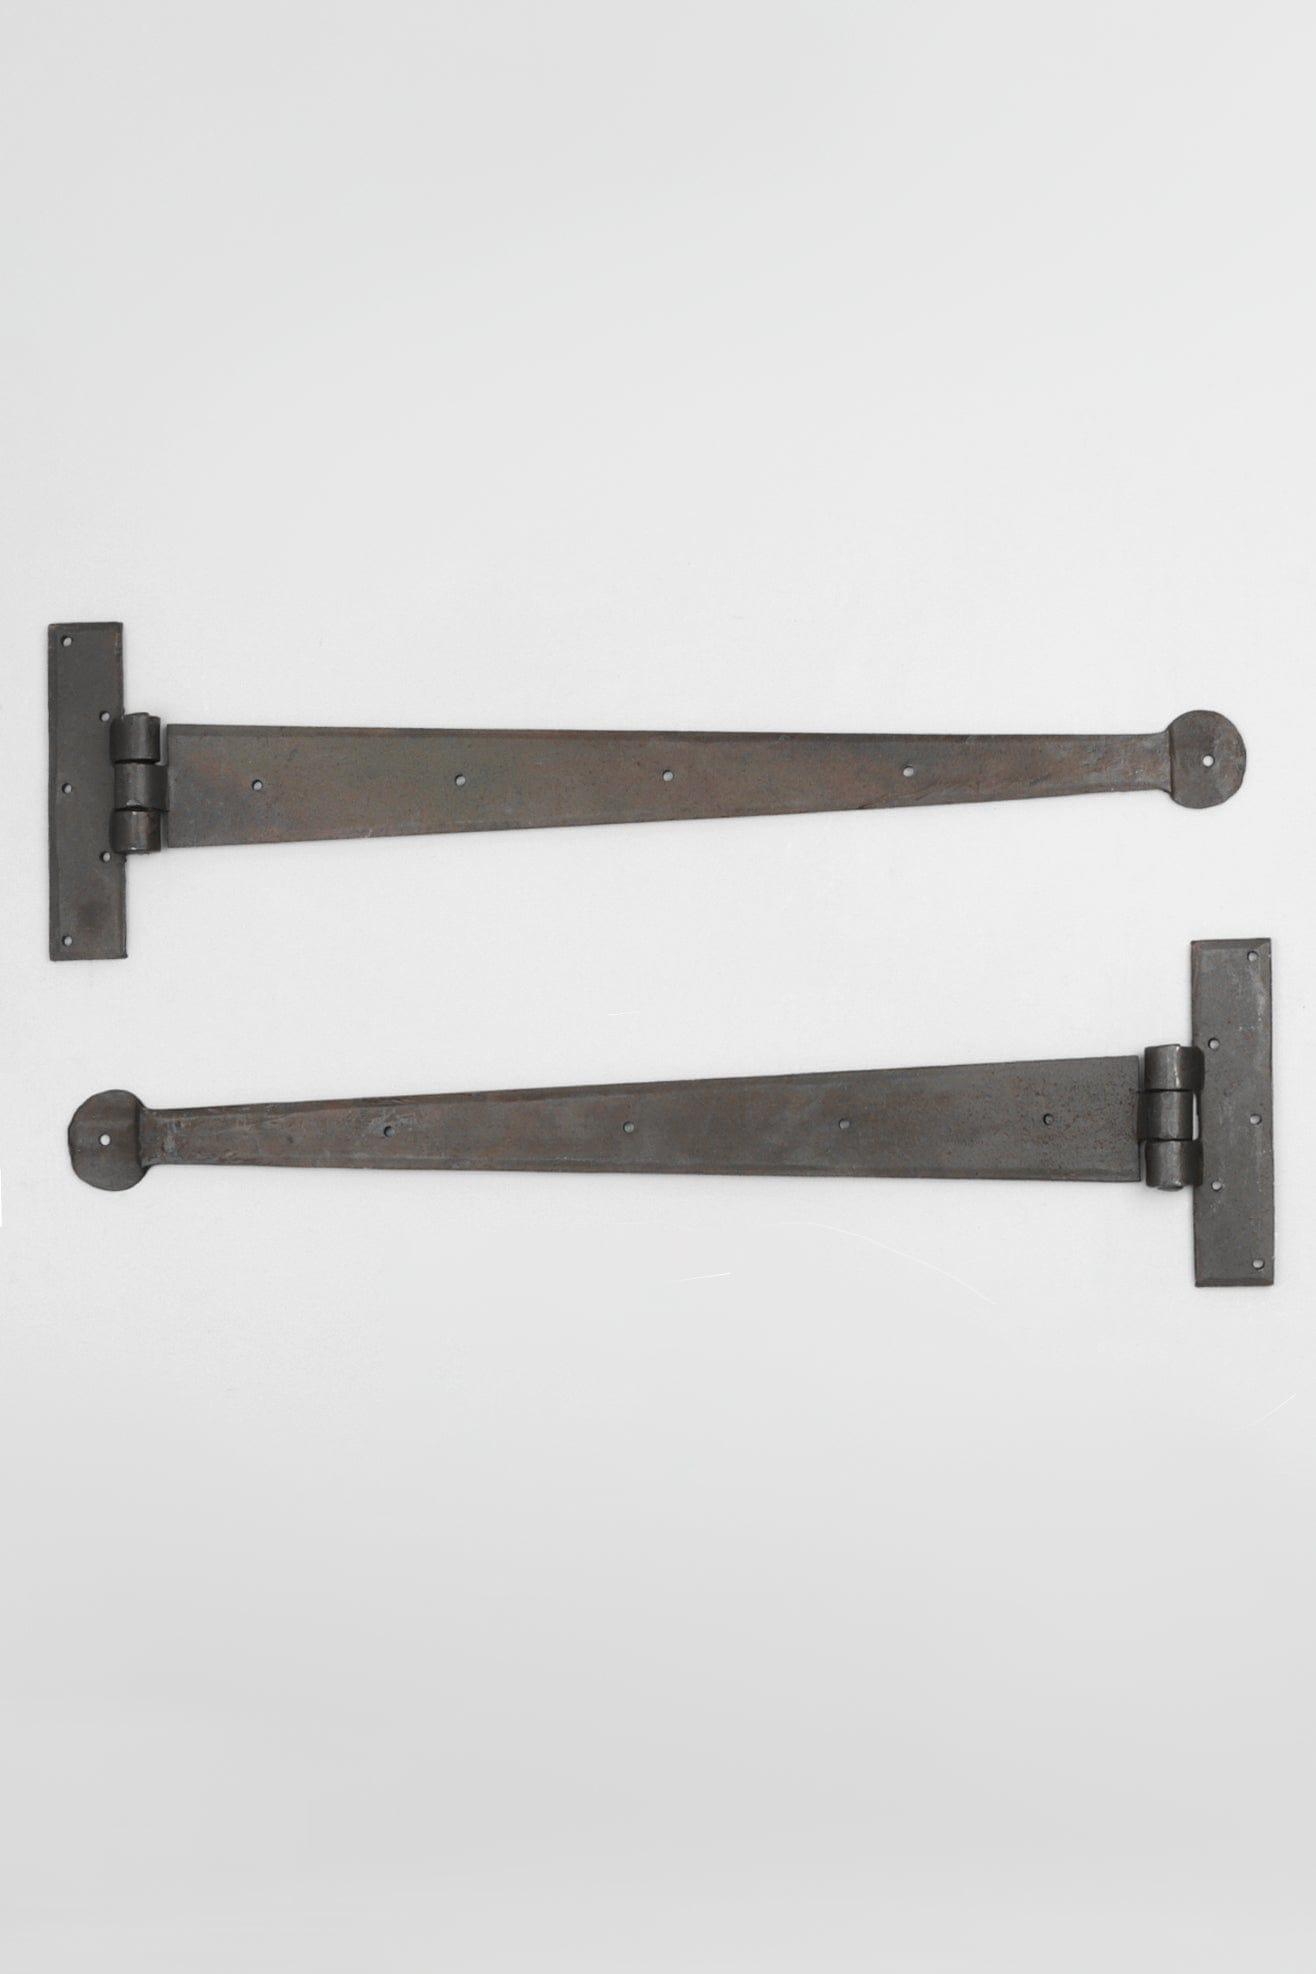 G Decor Hinges Set of 2 / Black Hand Forged Tee Hinge 18" Penny T Hinge Beeswax Solid Metal Pair